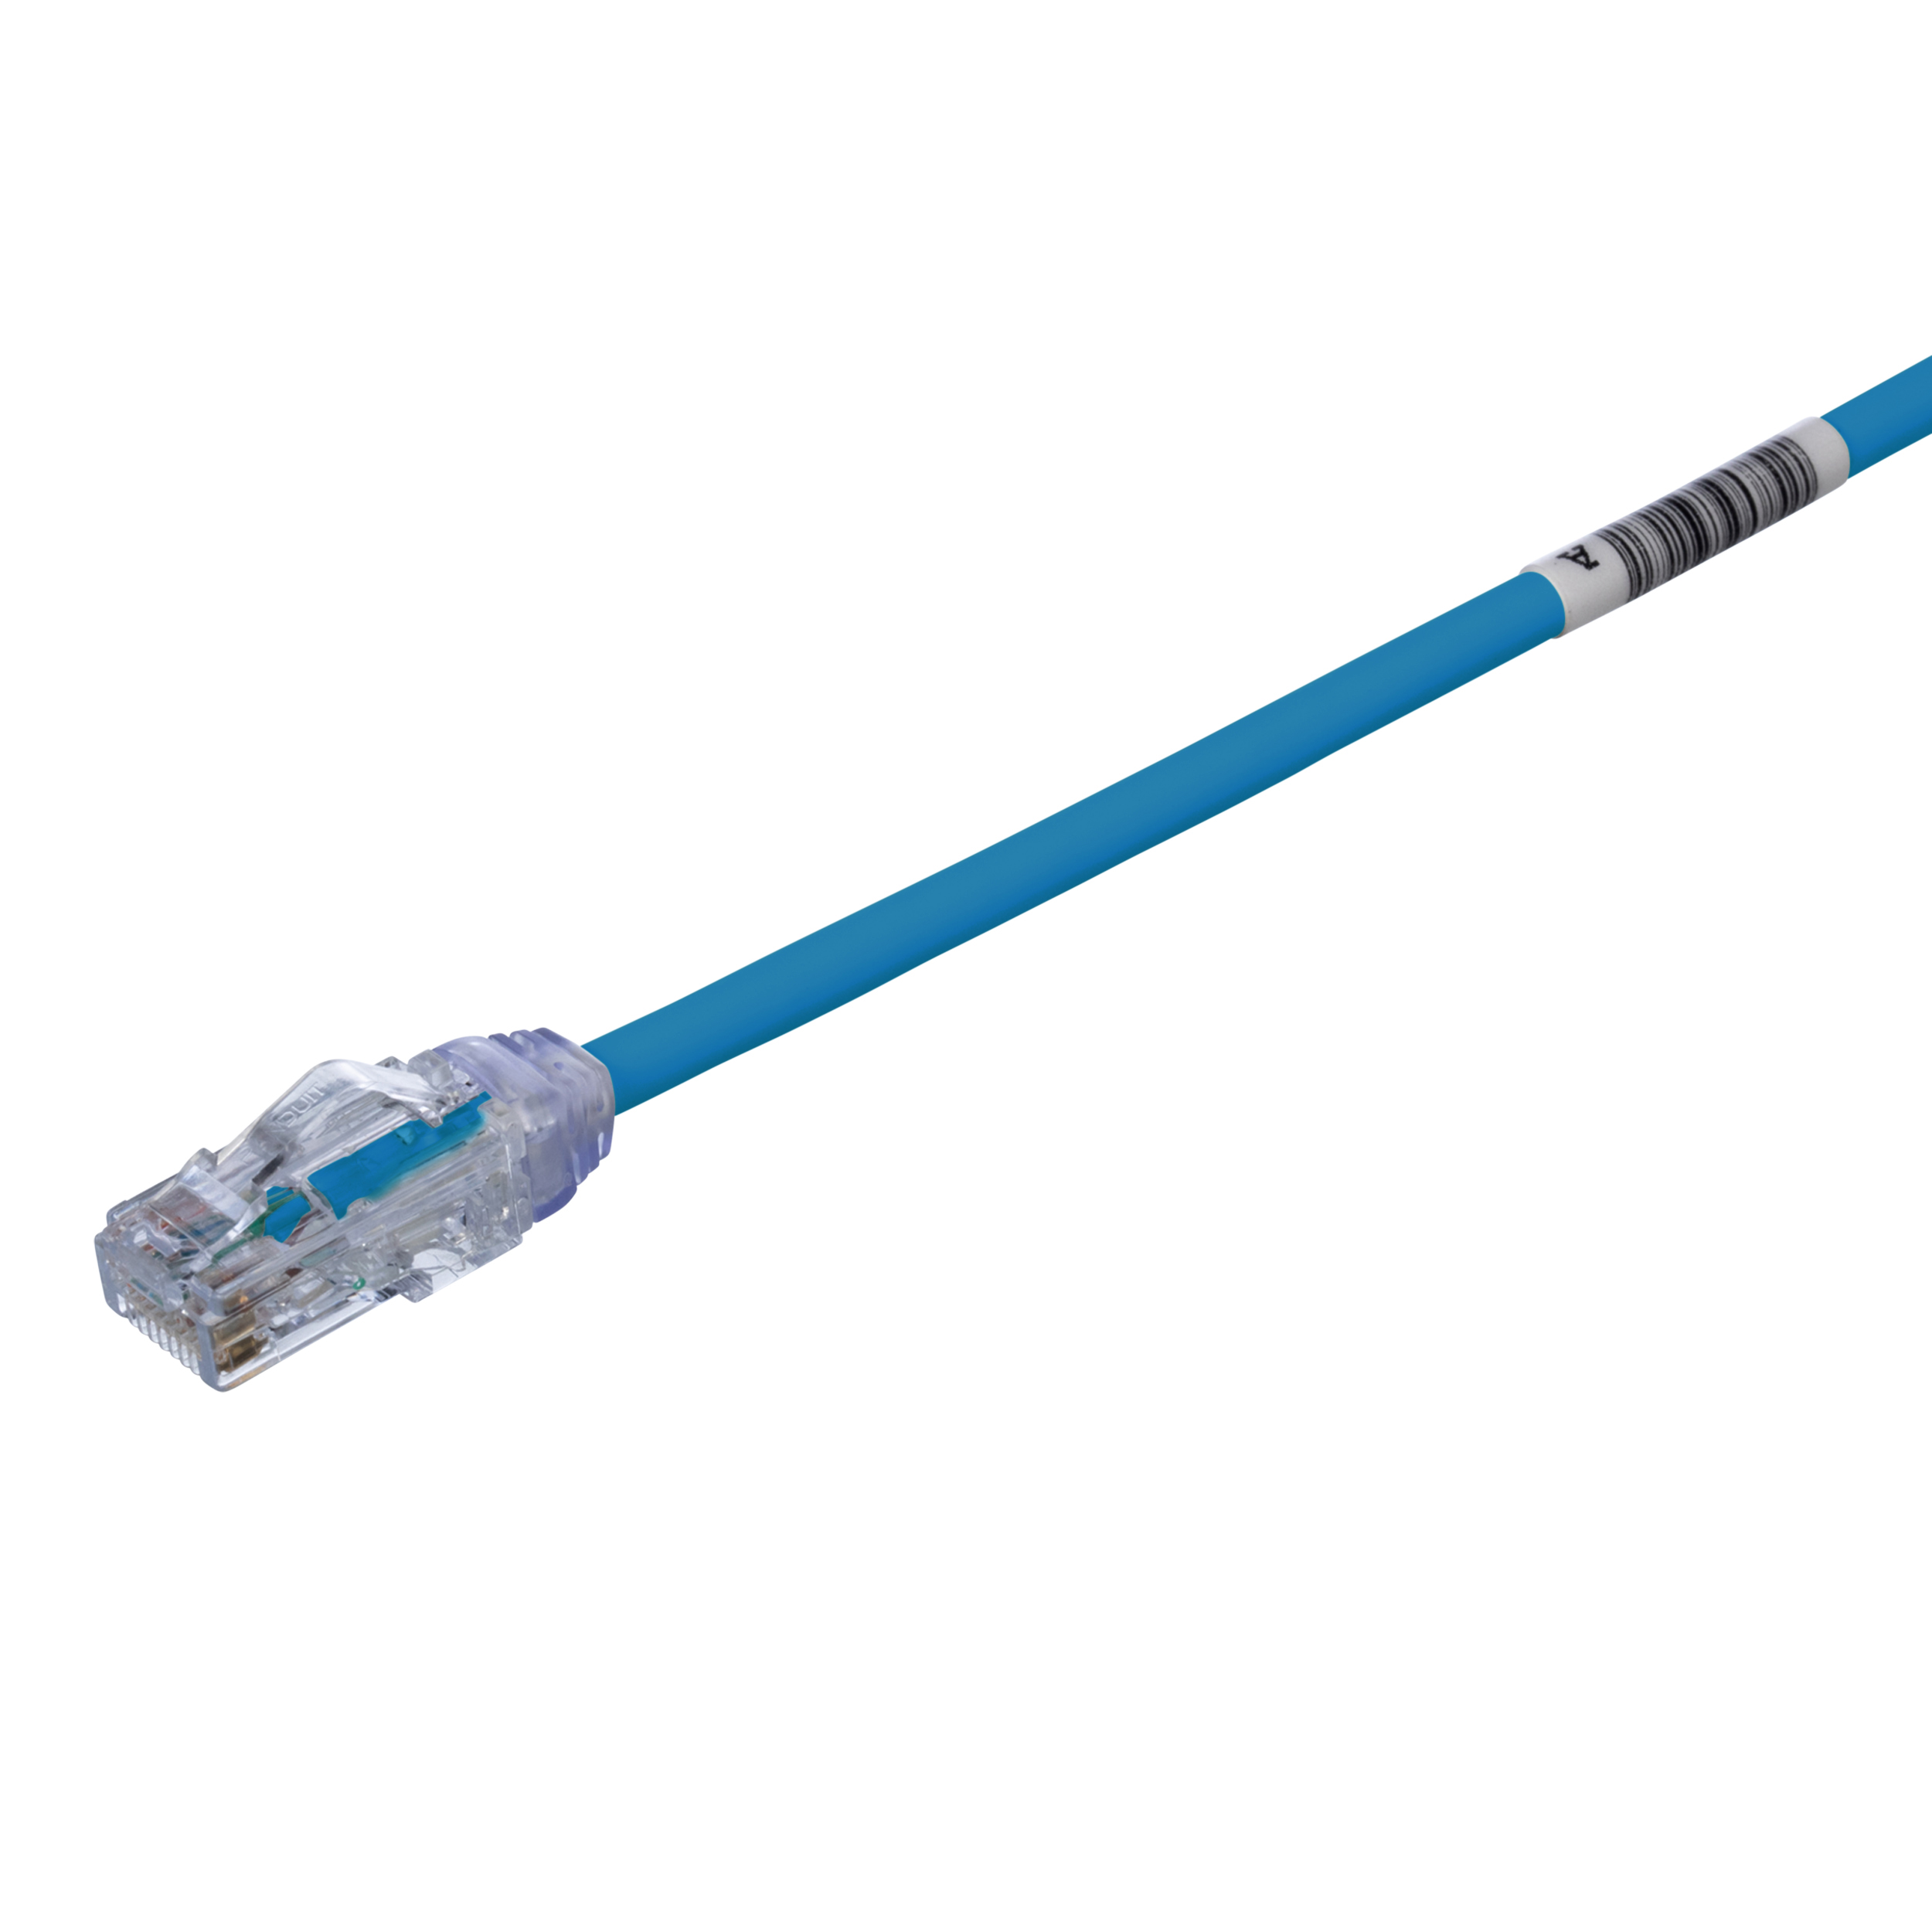 Cat 6A 28 AWG UTP Copper Patch Cord, 15 ft, Blue